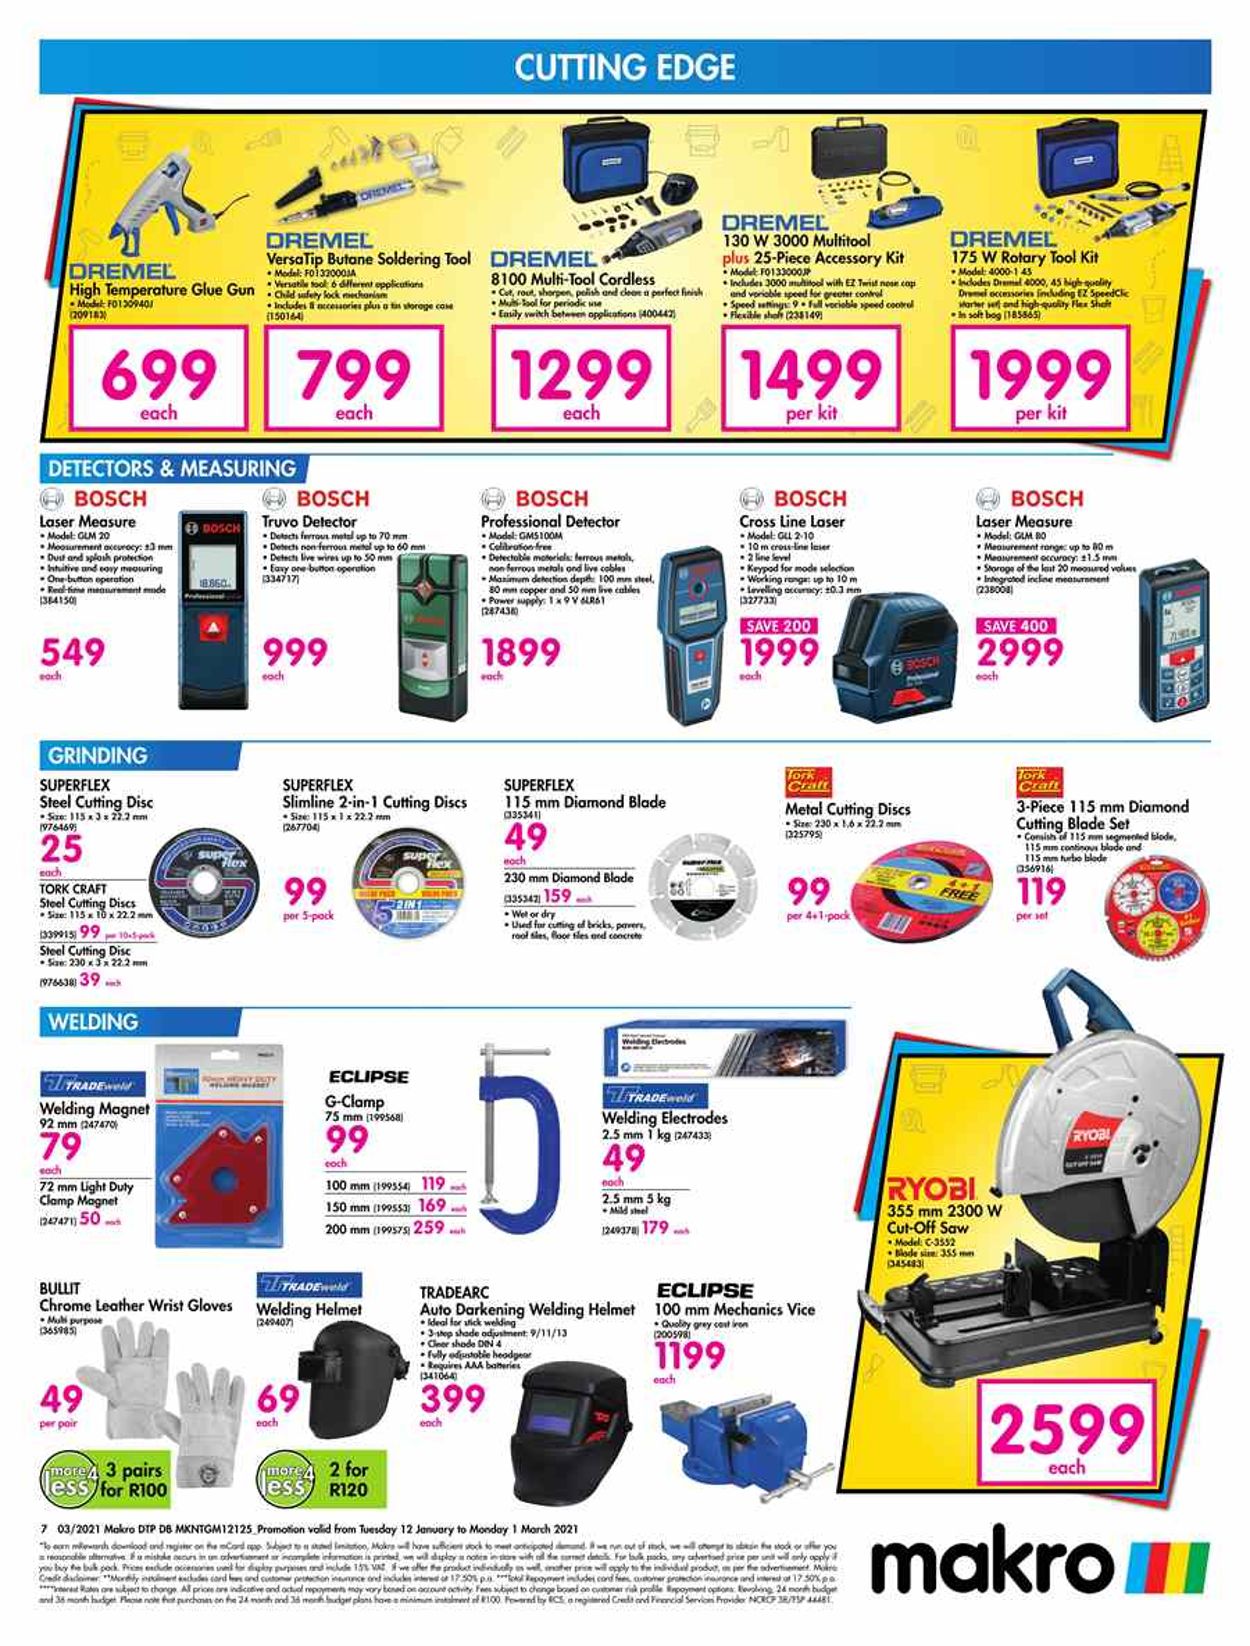 Makro Back to Site 2021 Catalogue - 2021/01/12-2021/03/01 (Page 7)